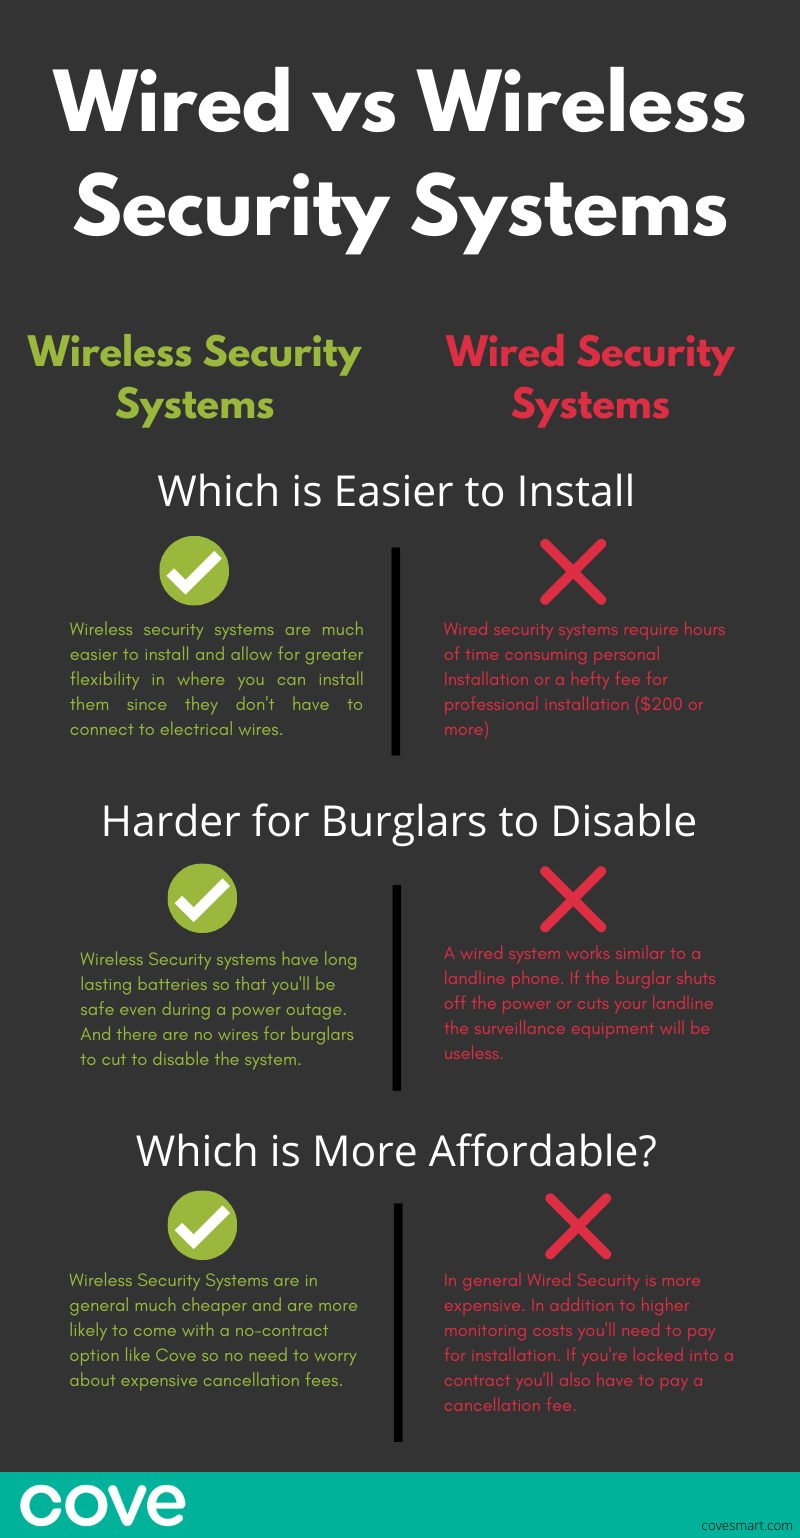 Wireless Security Systems are easier to install, harder for burglars to disable, and are more affordable.